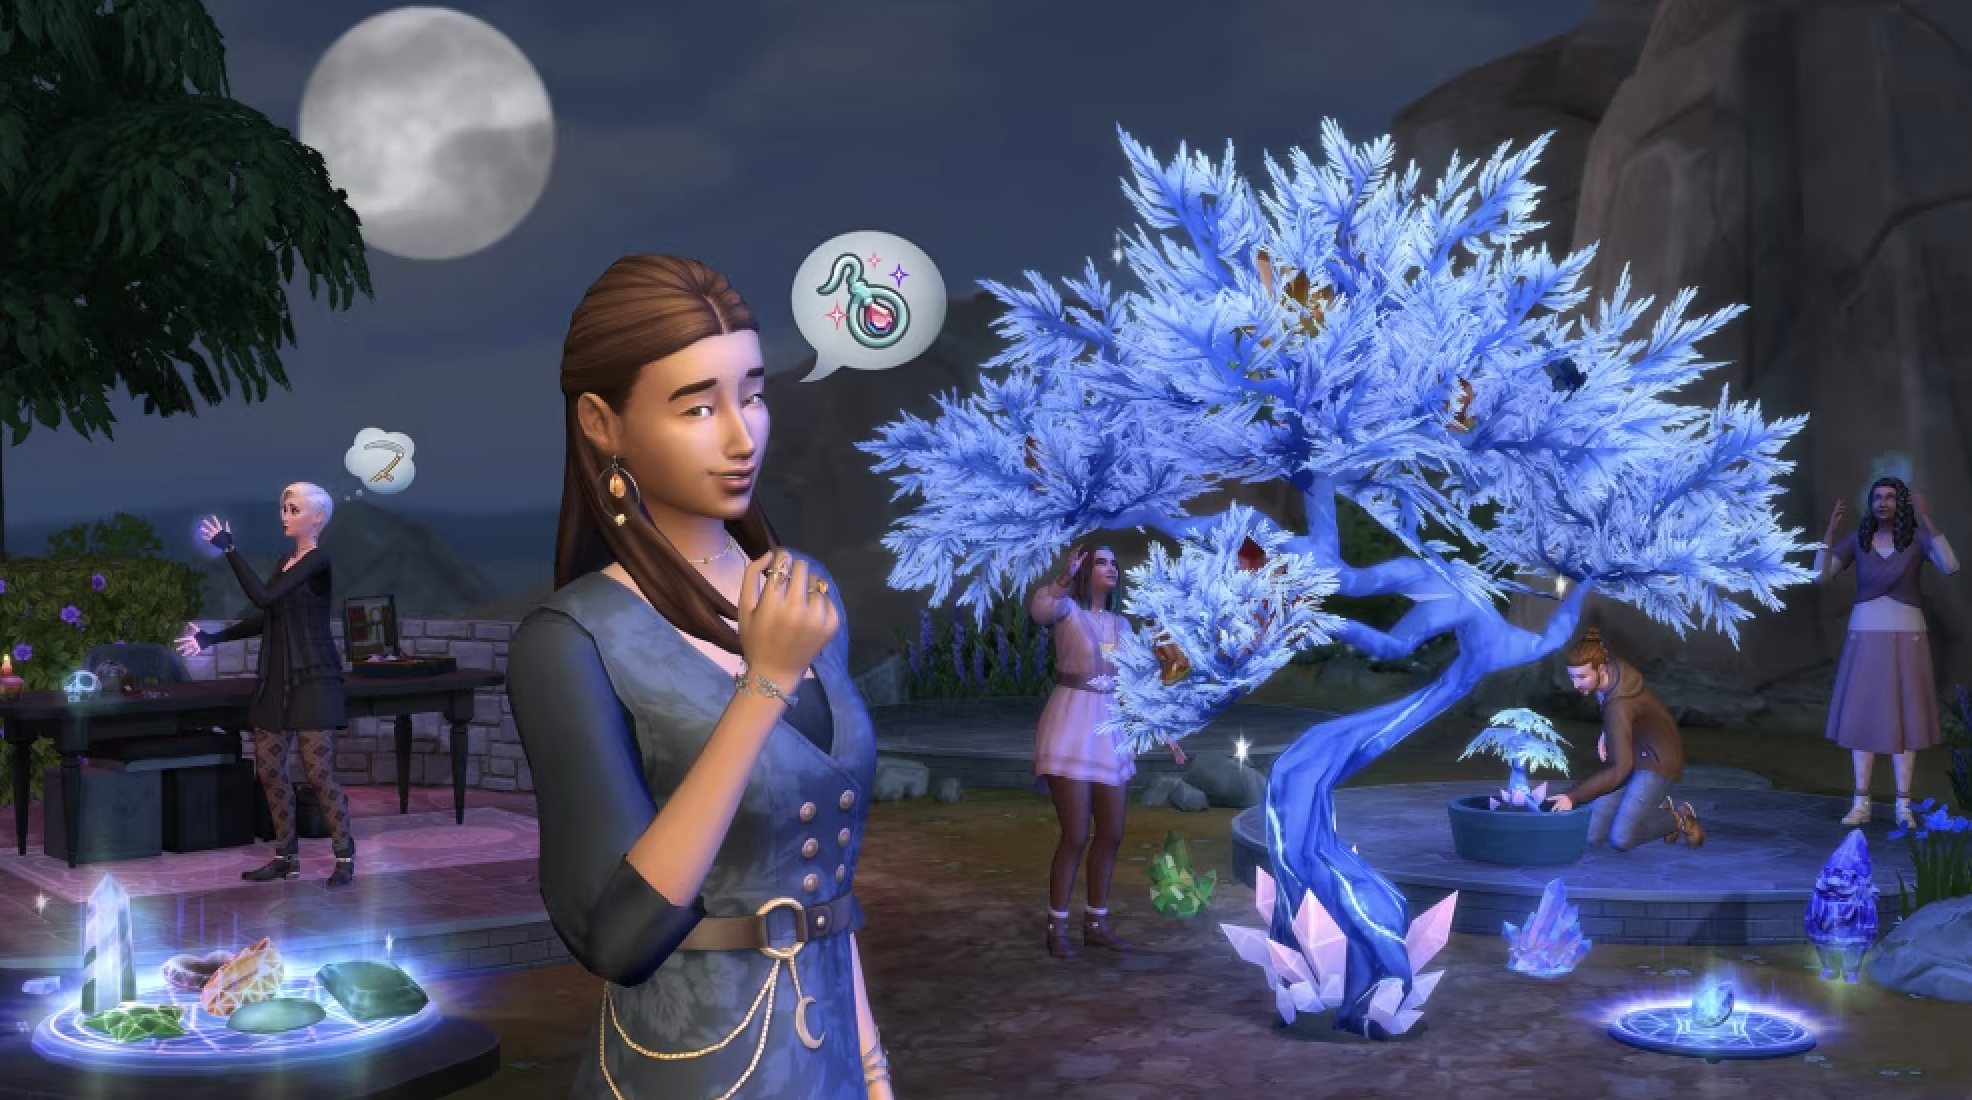 Animated characters at a moonlit gathering